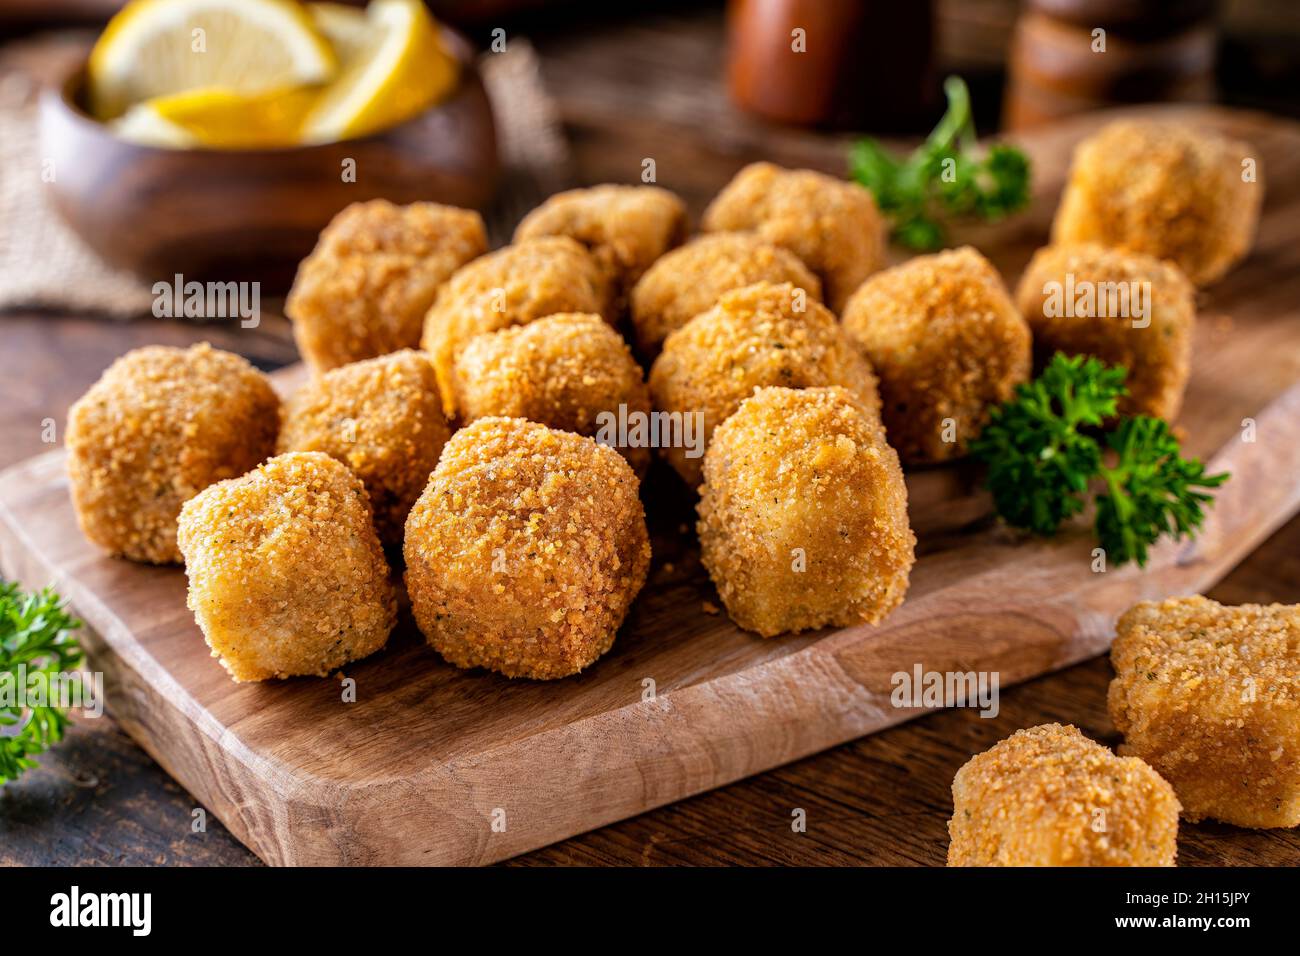 Delicious breaded fish nugget snacks on a rustic wood table top. Stock Photo